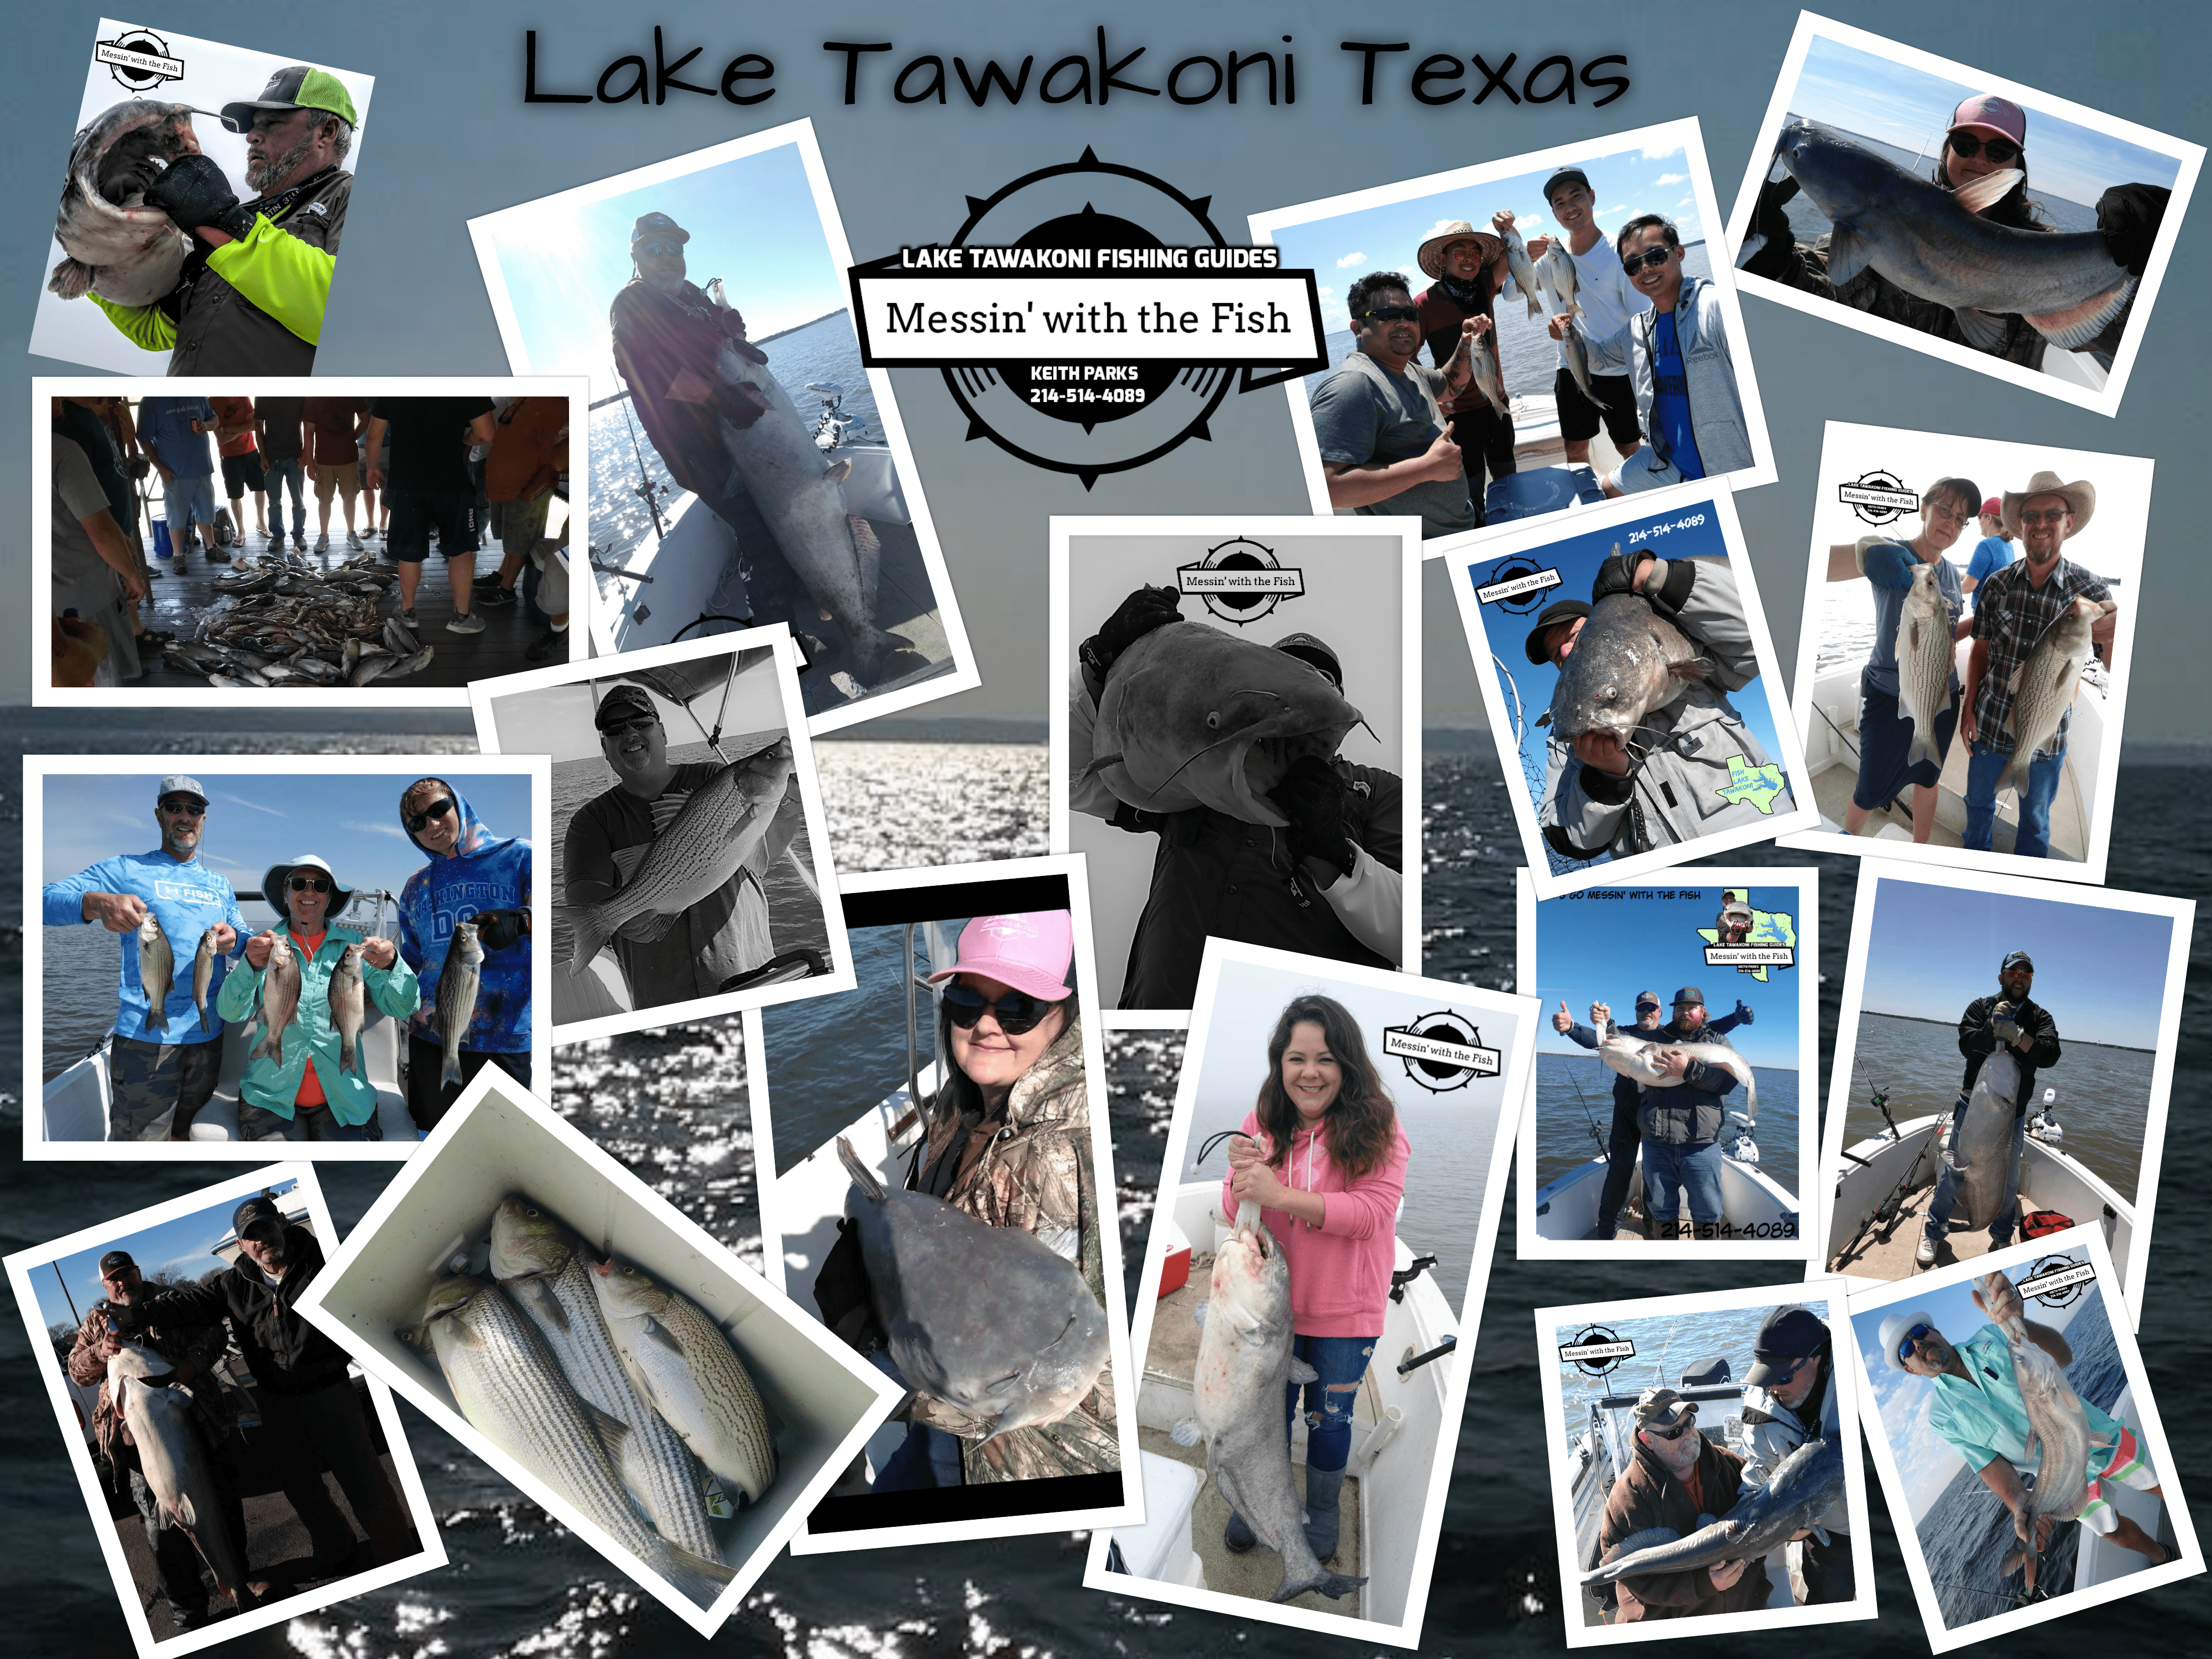 Get guide rates and pricing for fishing trips on Lake Tawakoni